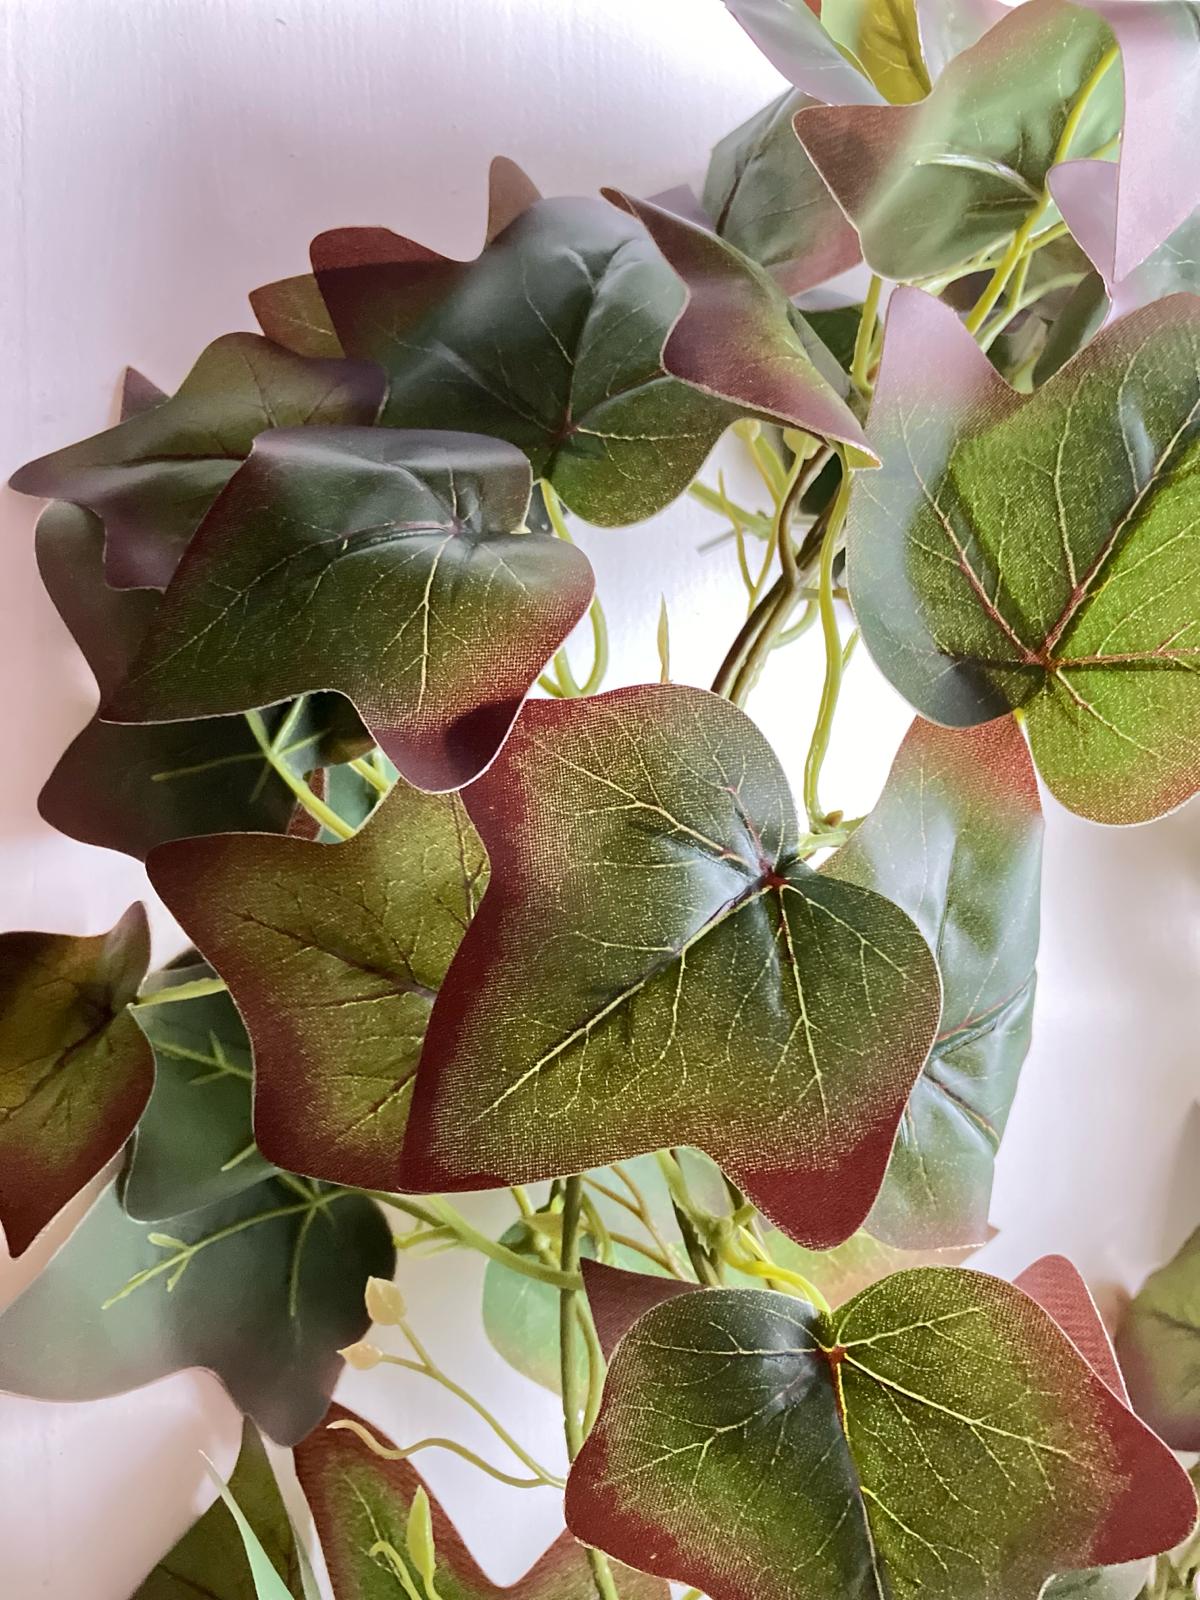 Artificial Ivy Garland with Burgundy Tips - 230cm